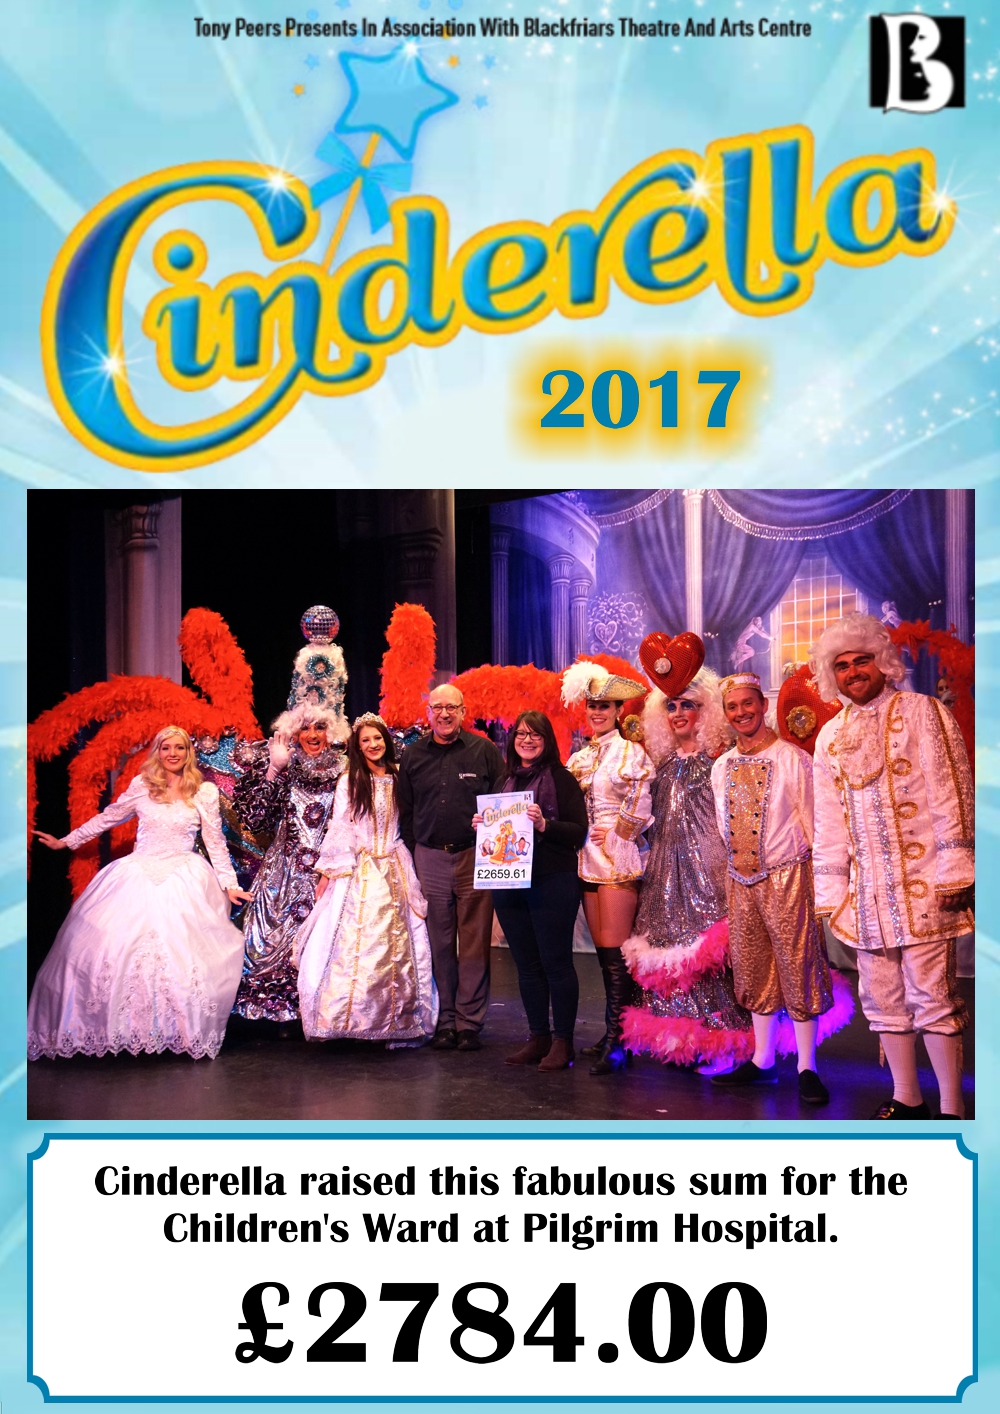 Cinderella raises thousands for Children's Ward for the 4th year running. 